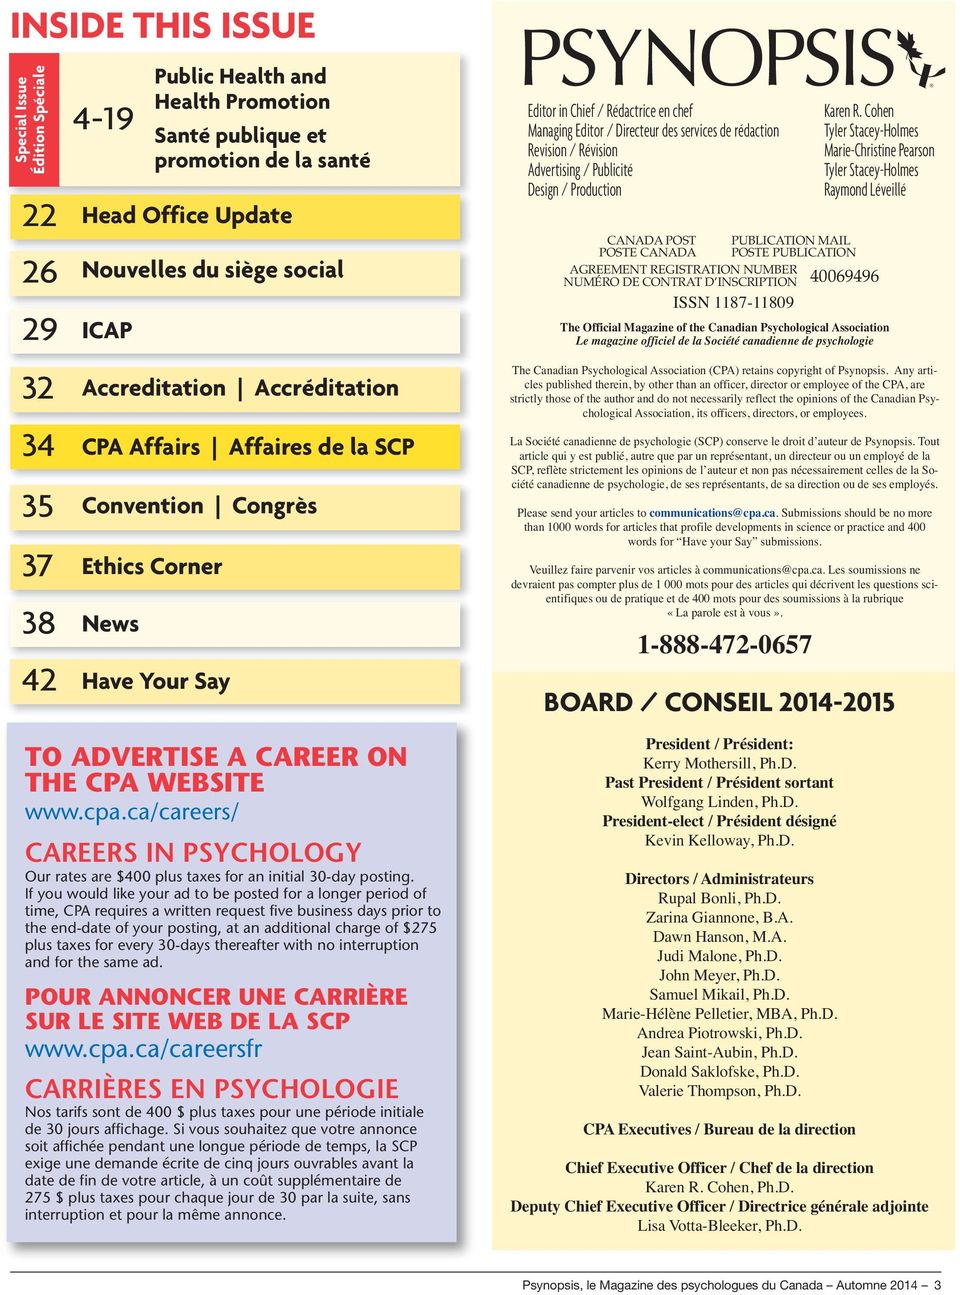 ca/careers/ CAREERS IN PSYCHOLOGY Our rates are $400 plus taxes for an initial 30-day posting.